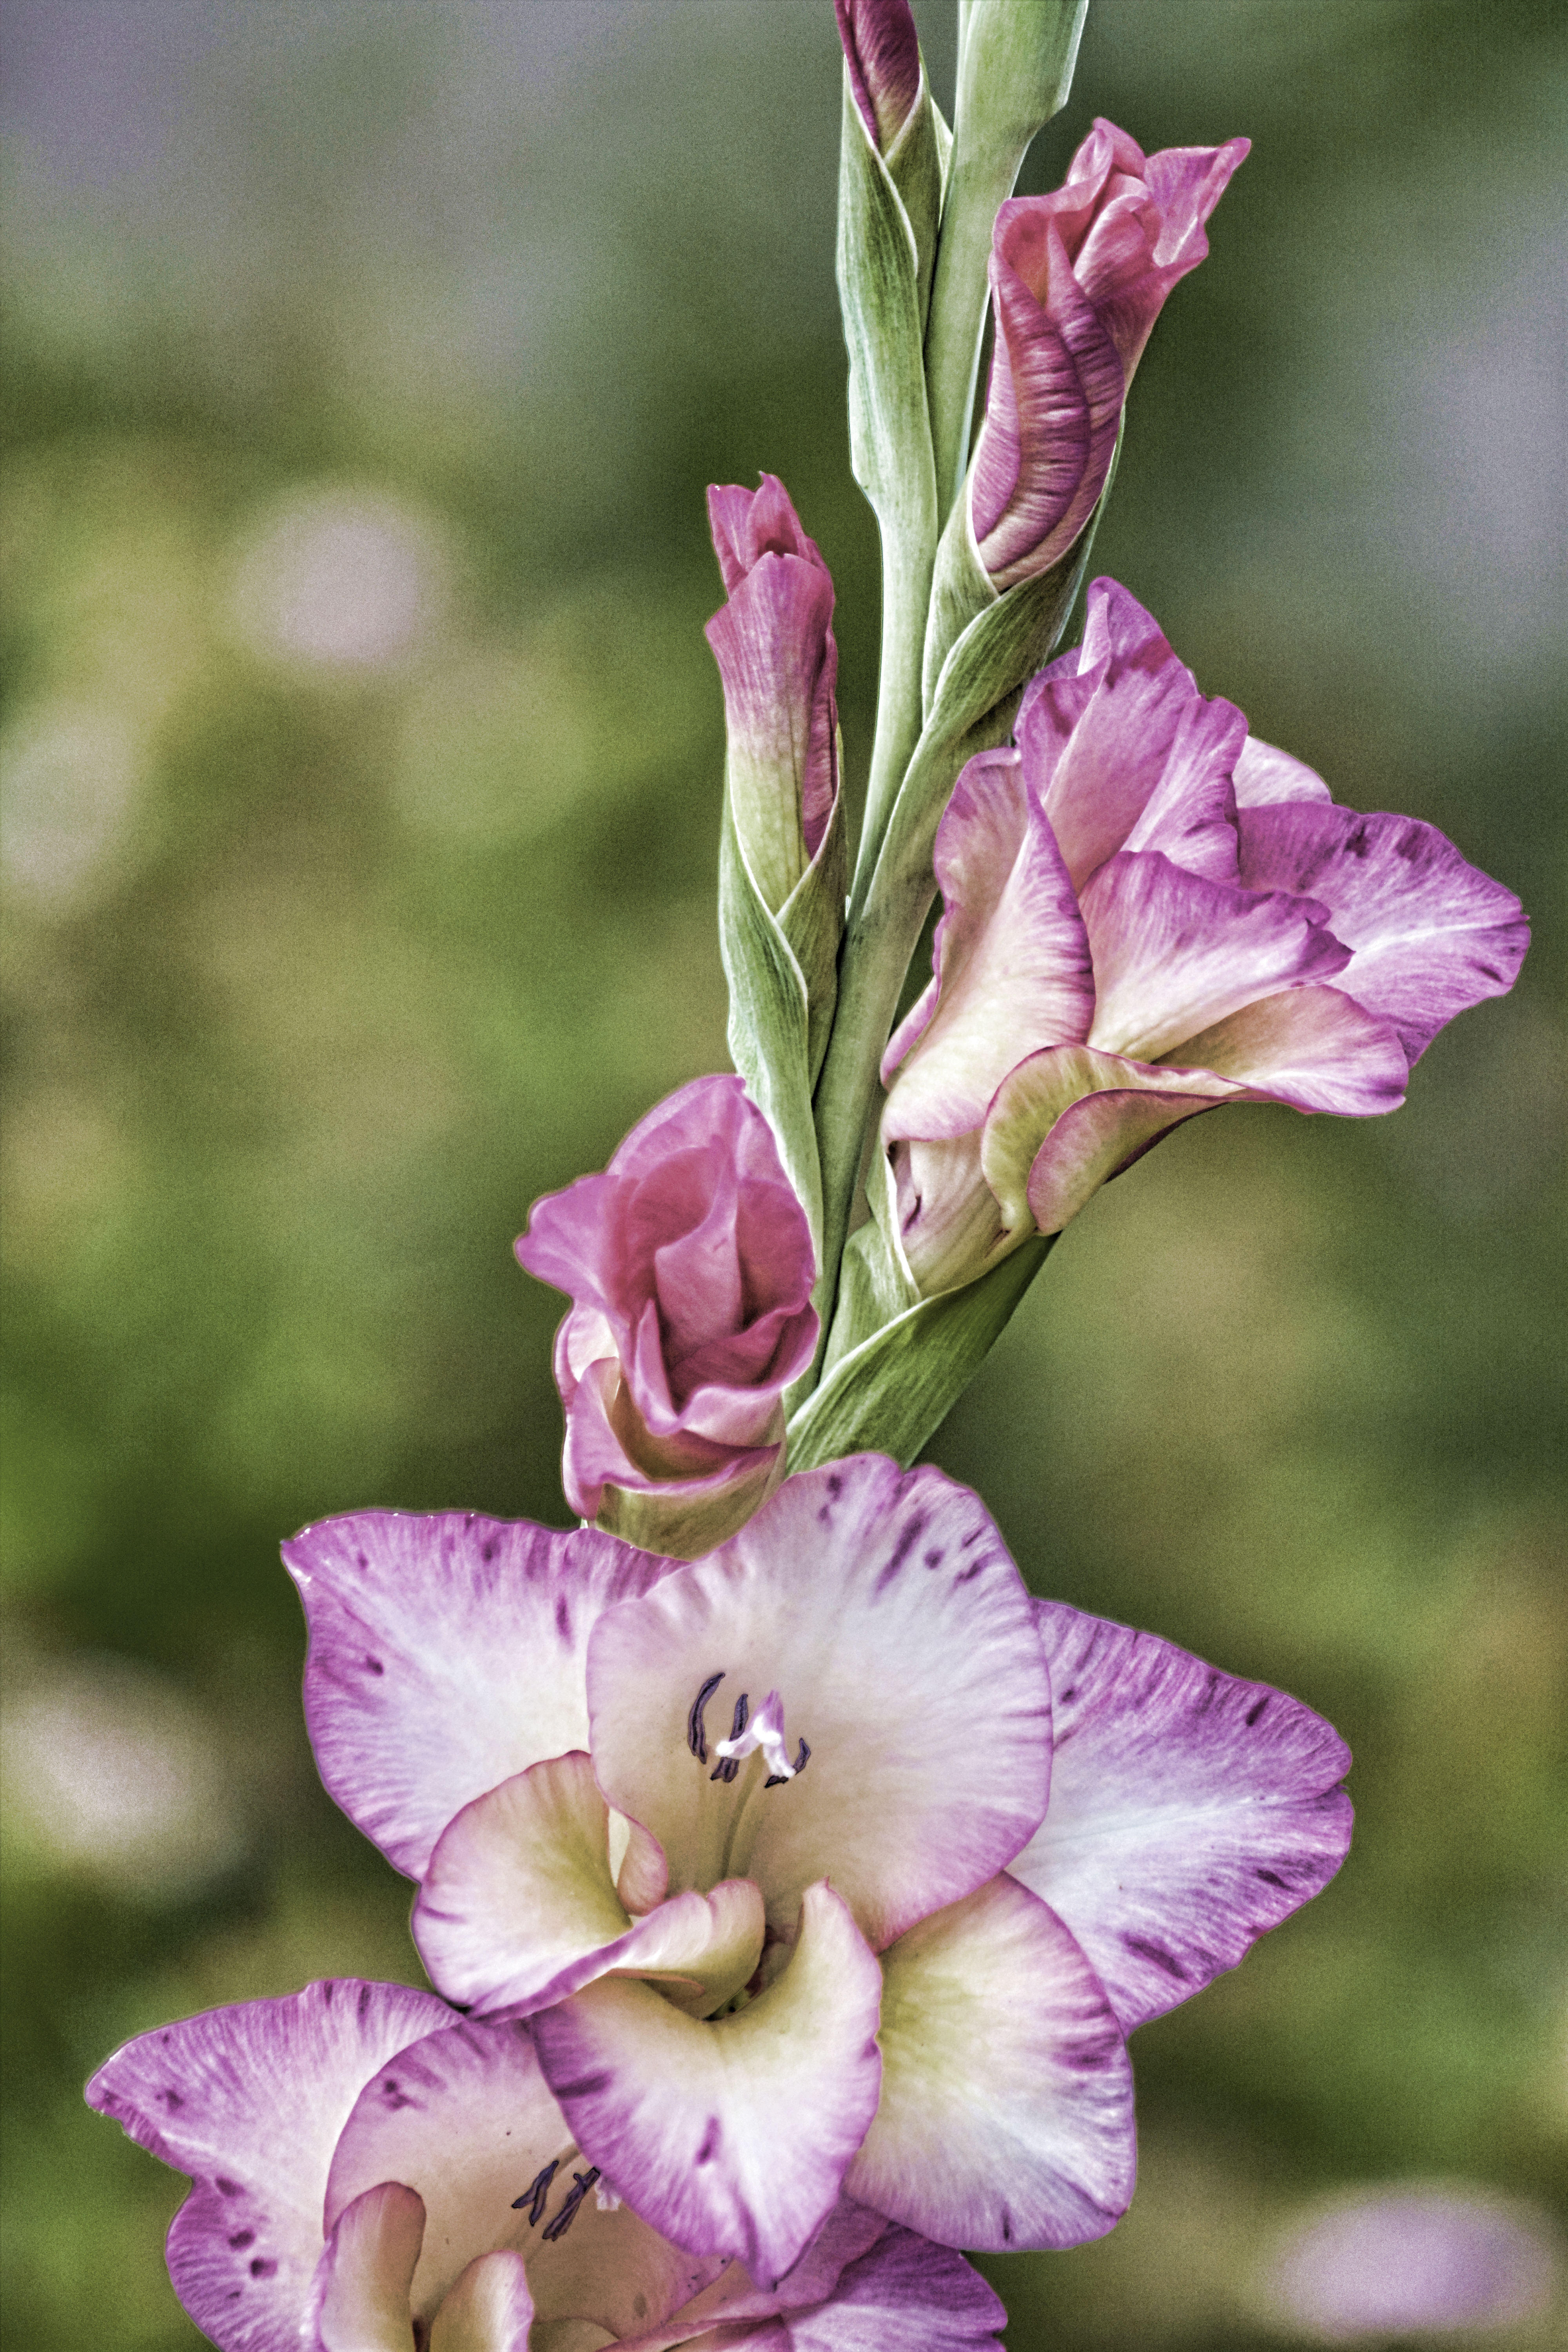 image of white gladiola with pink tips